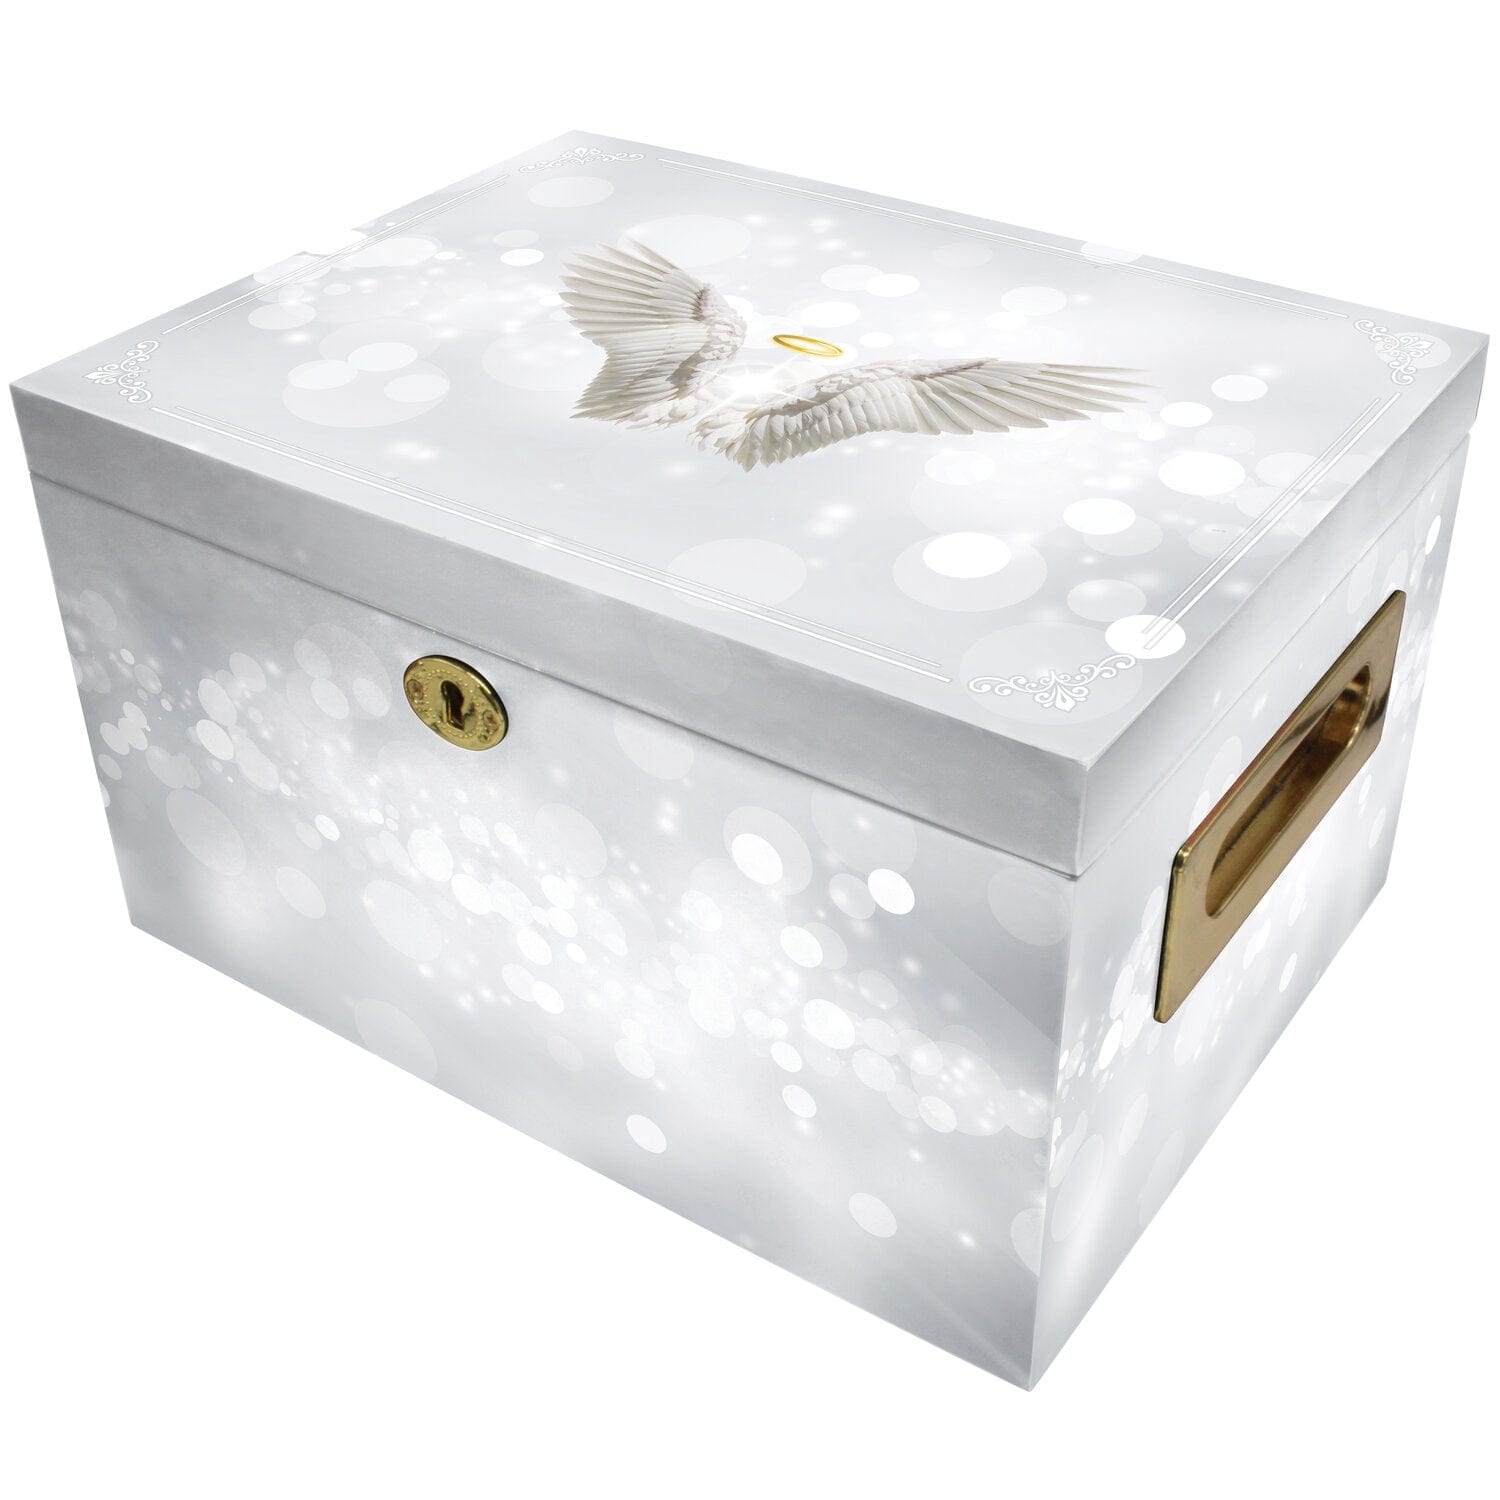 Commemorative Cremation Urns Home & Garden Urn Collection Chest Angel of Mine (White) Memorial Collection Chest Cremation Urn